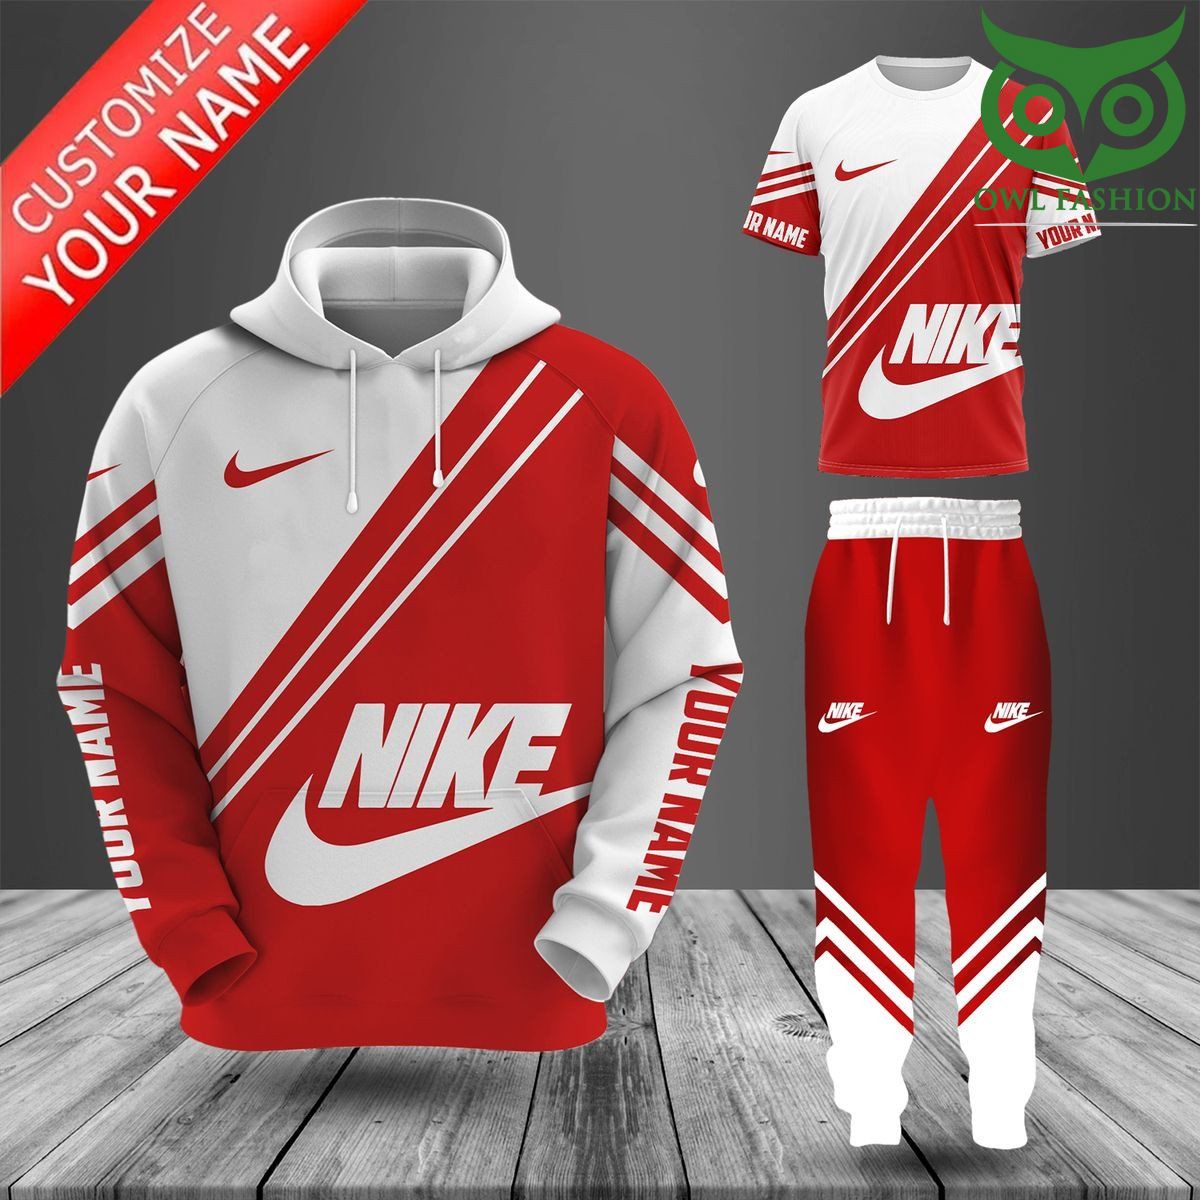 2 Nike red and white 3D hoodies T Shirt and sweatpants